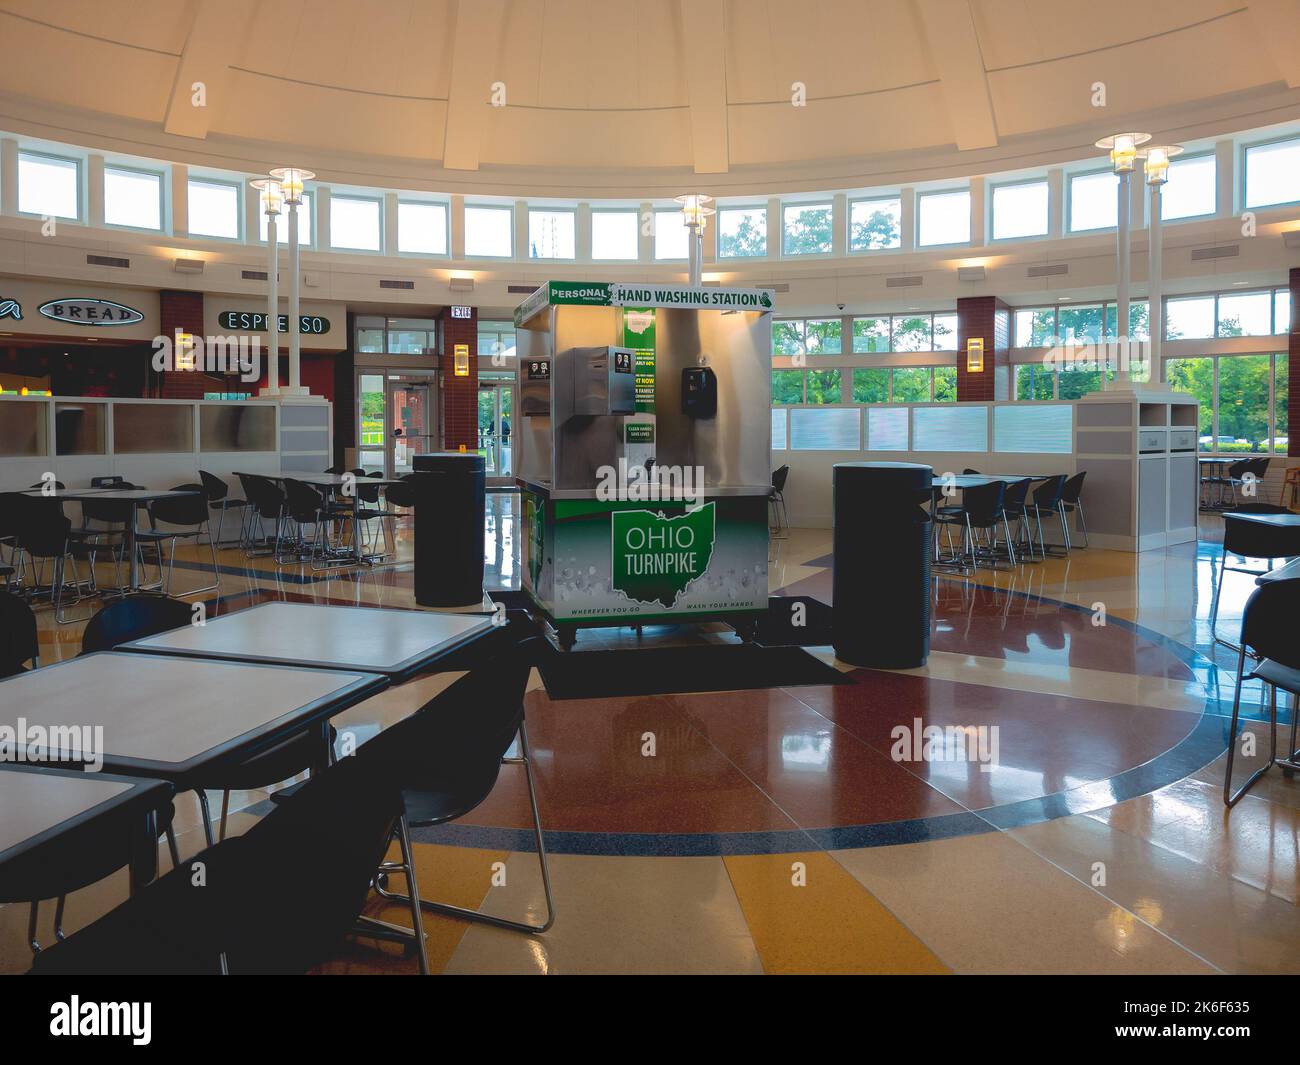 Ohio Turnpike, Genoa, Ohio - Sep 11, 2022: Landscape Interior Wide View of Wyandot Service Plaza Building Interior with Shops and Restaurant in Backgr Stock Photo